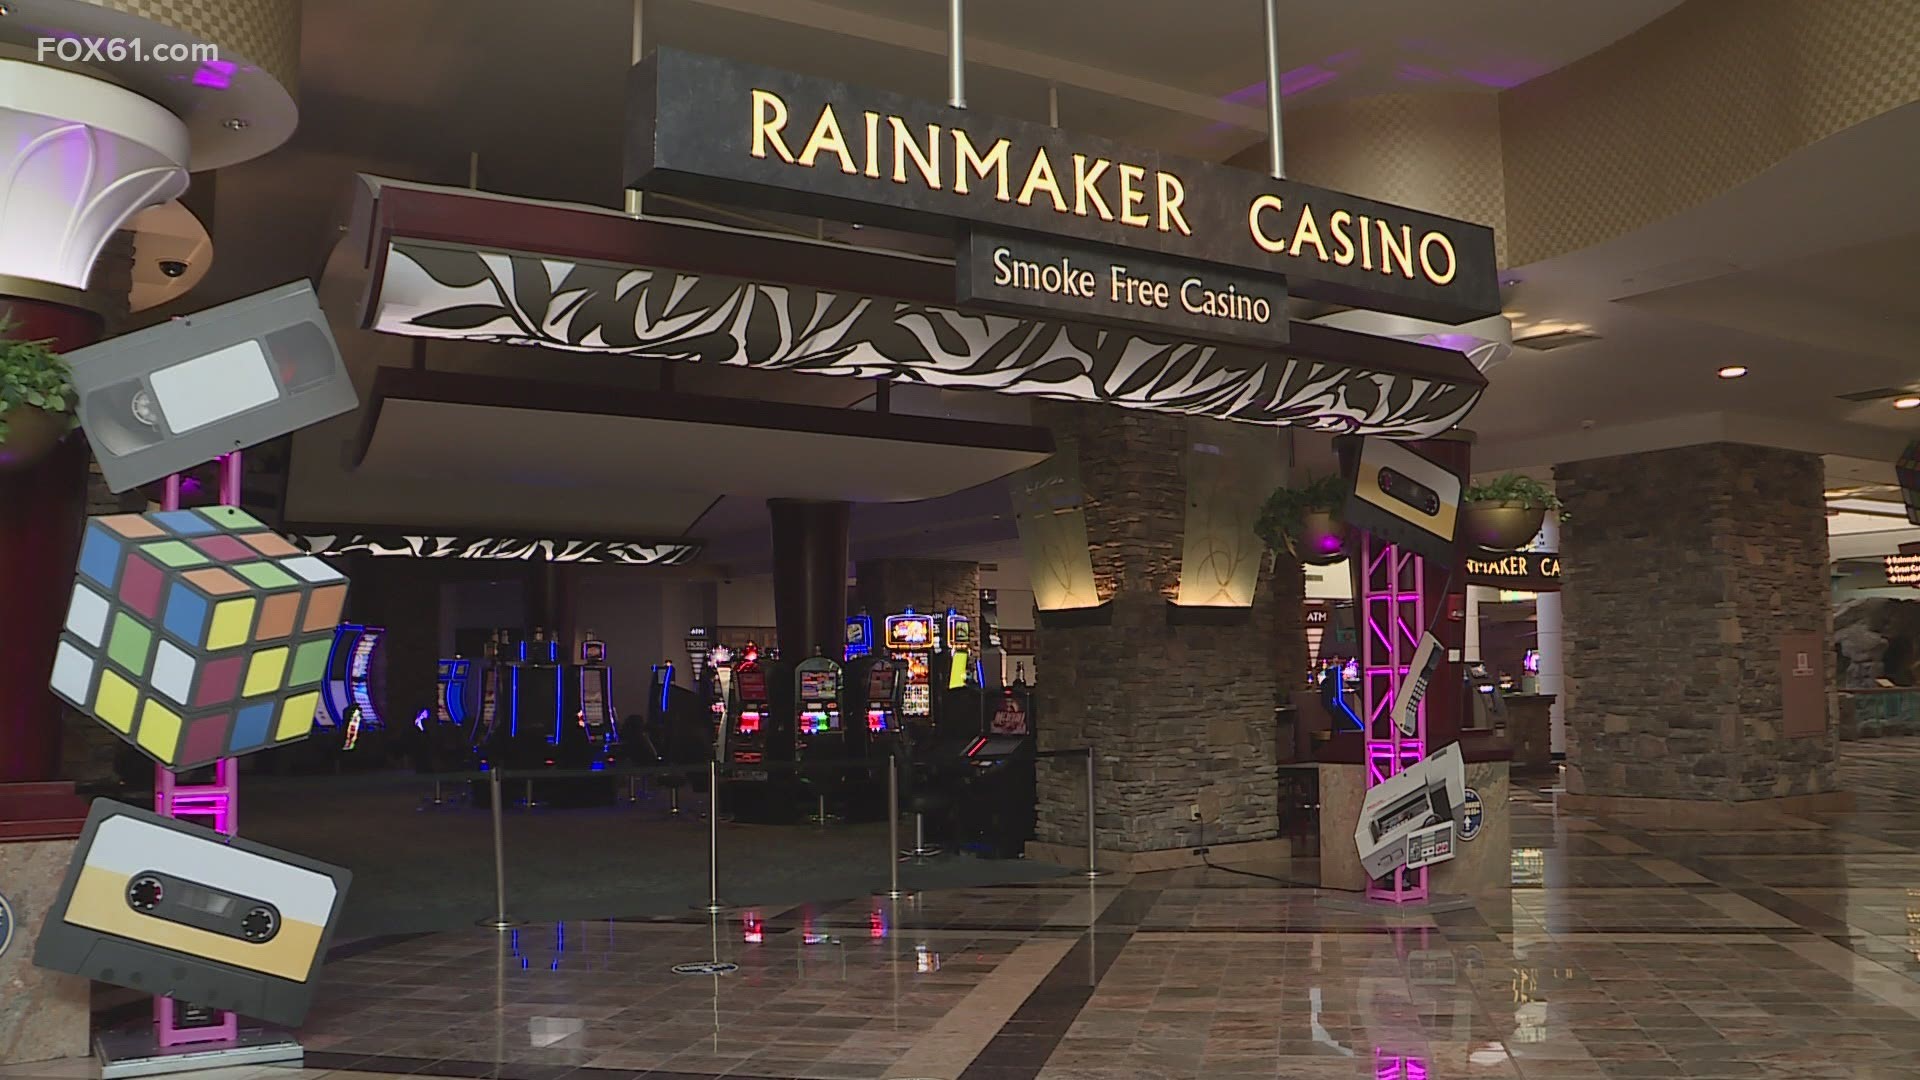 They are the only and first casino in the country to offer this experience.